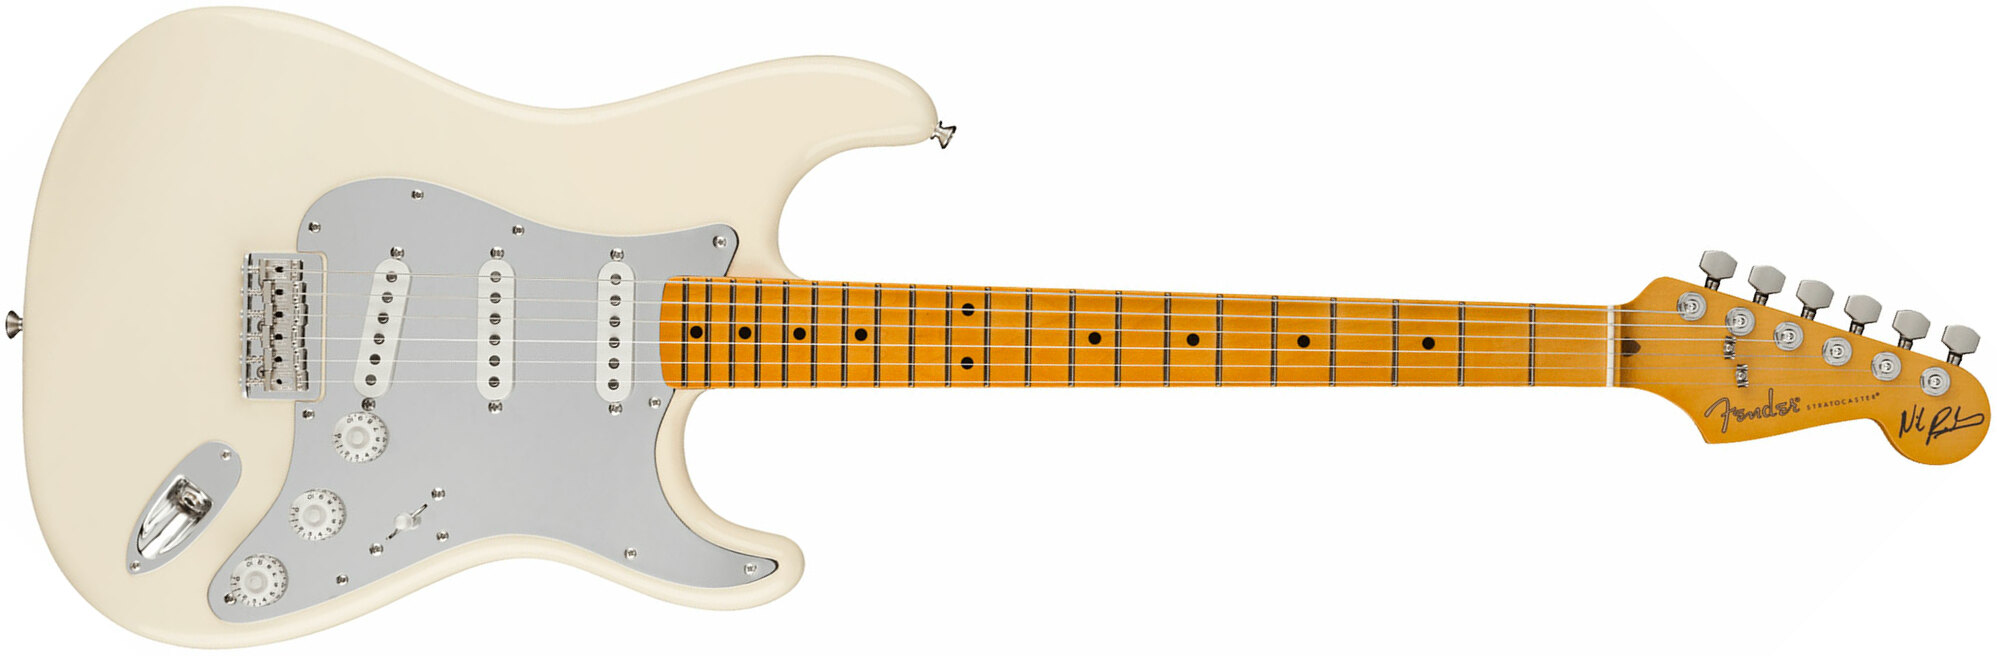 Fender Nile Rodgers Strat Hitmaker Usa Signature 3s Ht Mn - Olympic White - Guitare Électrique Forme Str - Main picture